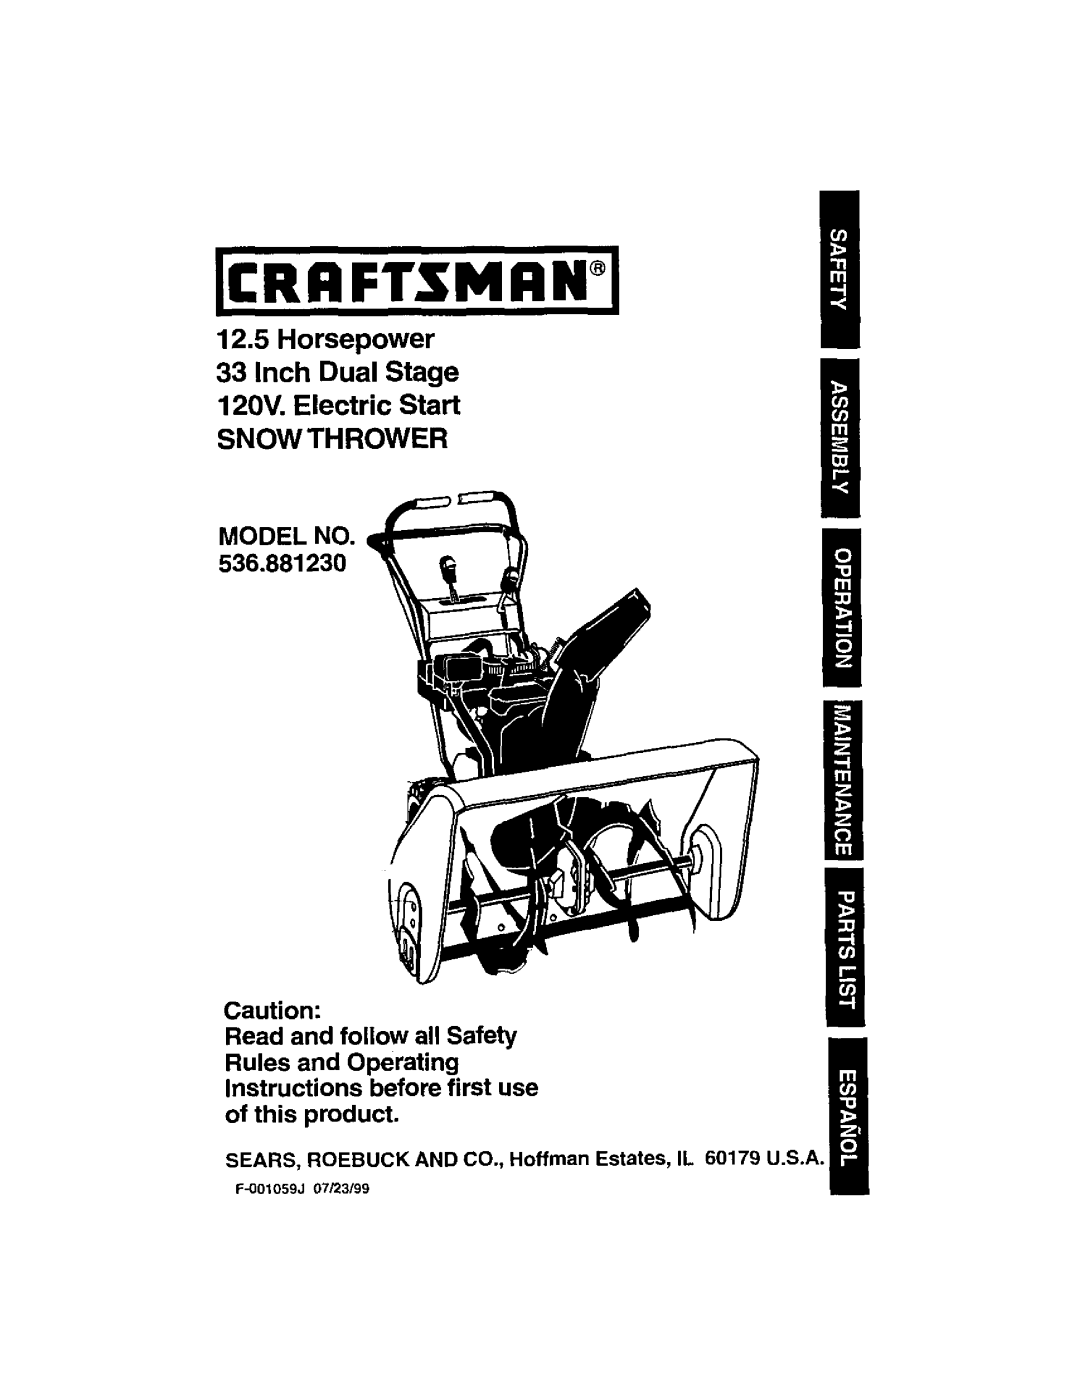 Craftsman 536.88123 operating instructions Horsepower 33 Inch Dual Stage, 120V. Electric Start SNOW THROWER, Model No 